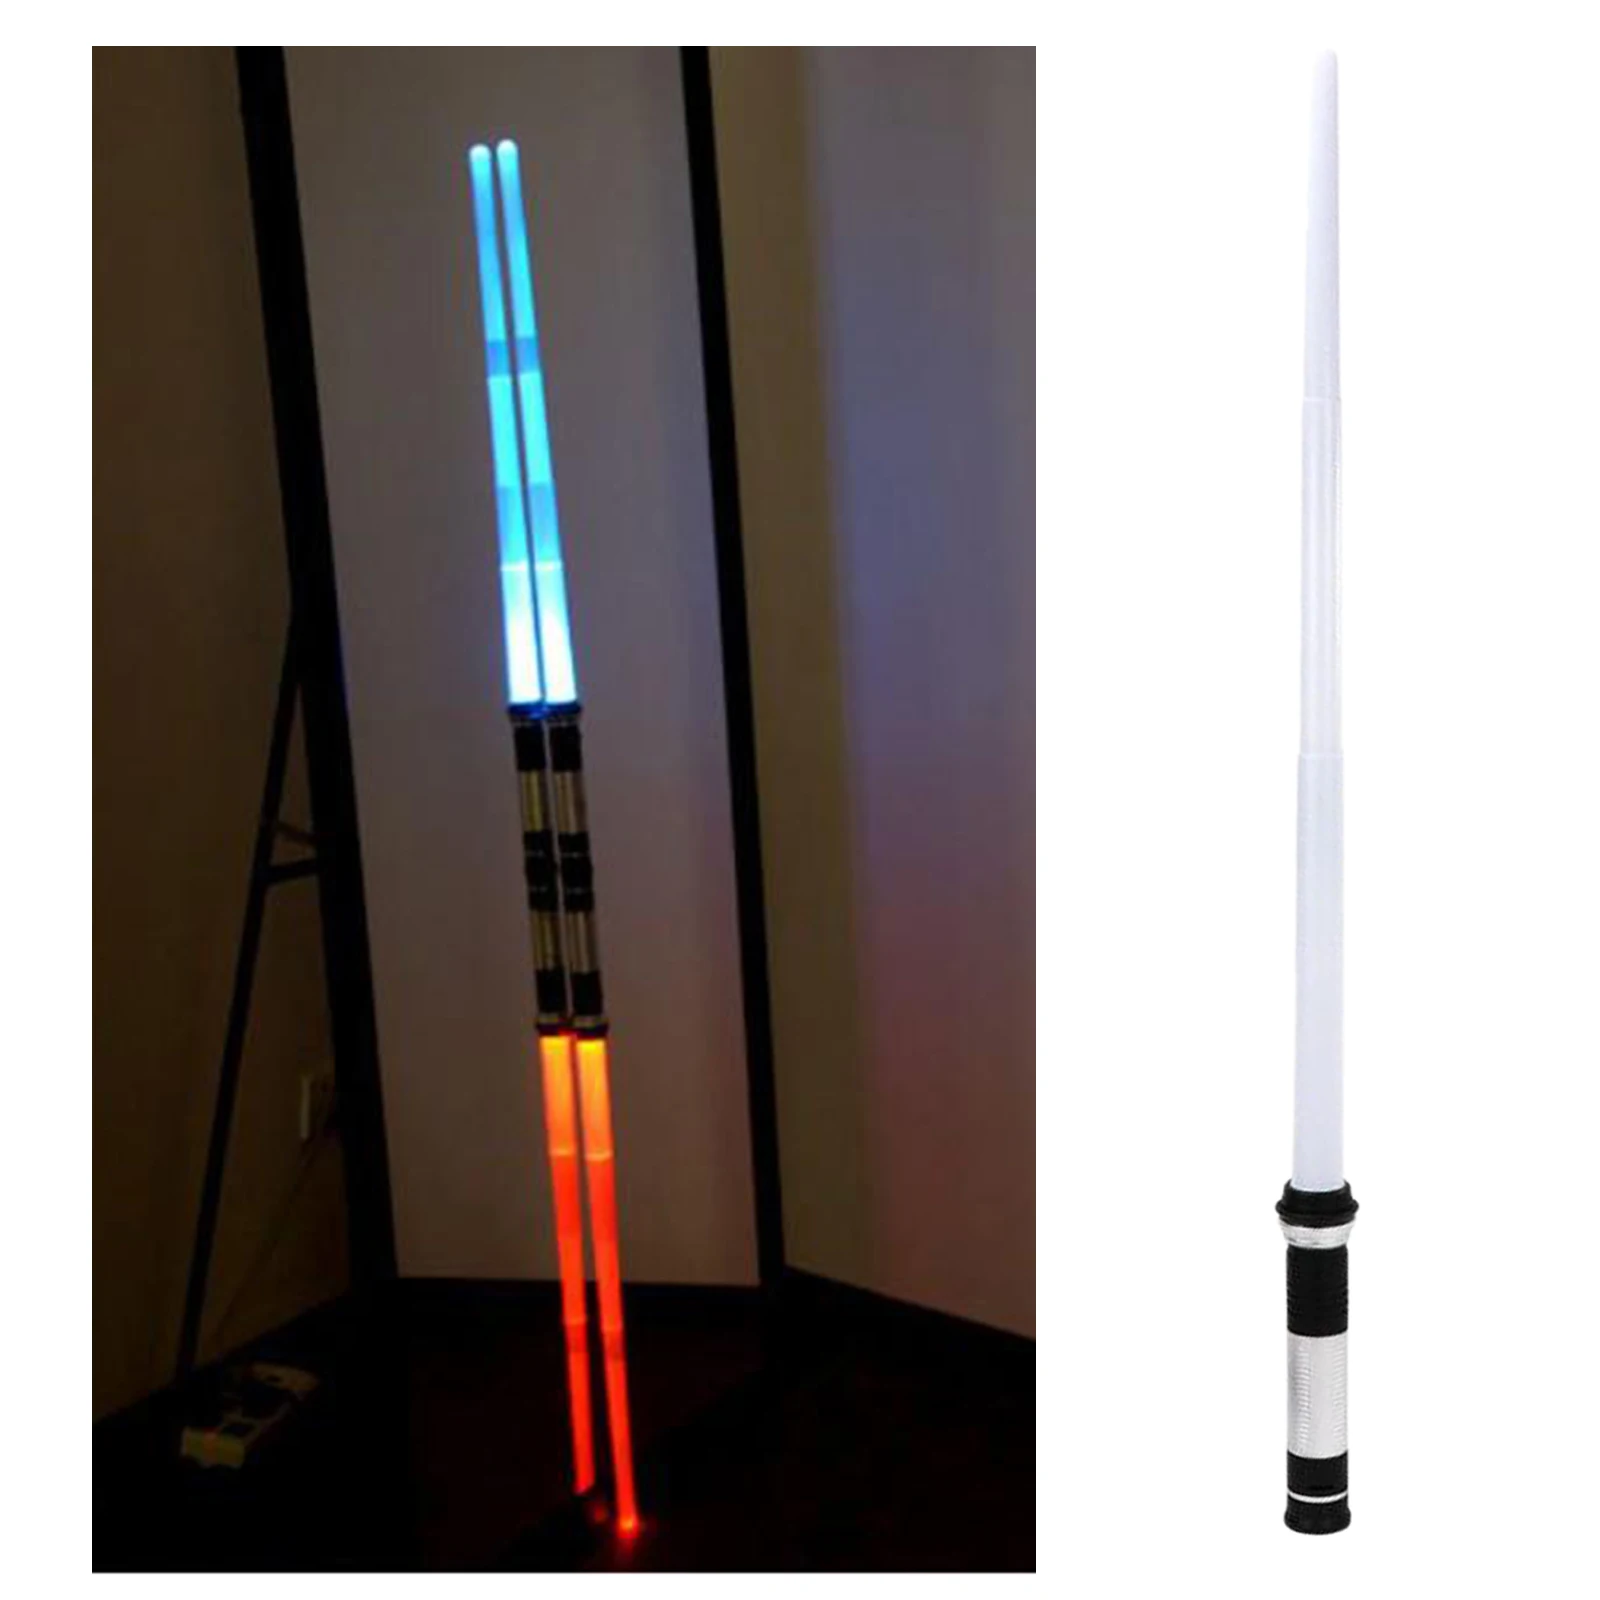 Flashing Lightsaber Light Up 7 Color Changing w/ Sound Costume War Fighters and Warriors Kid Gift Xmas Presents